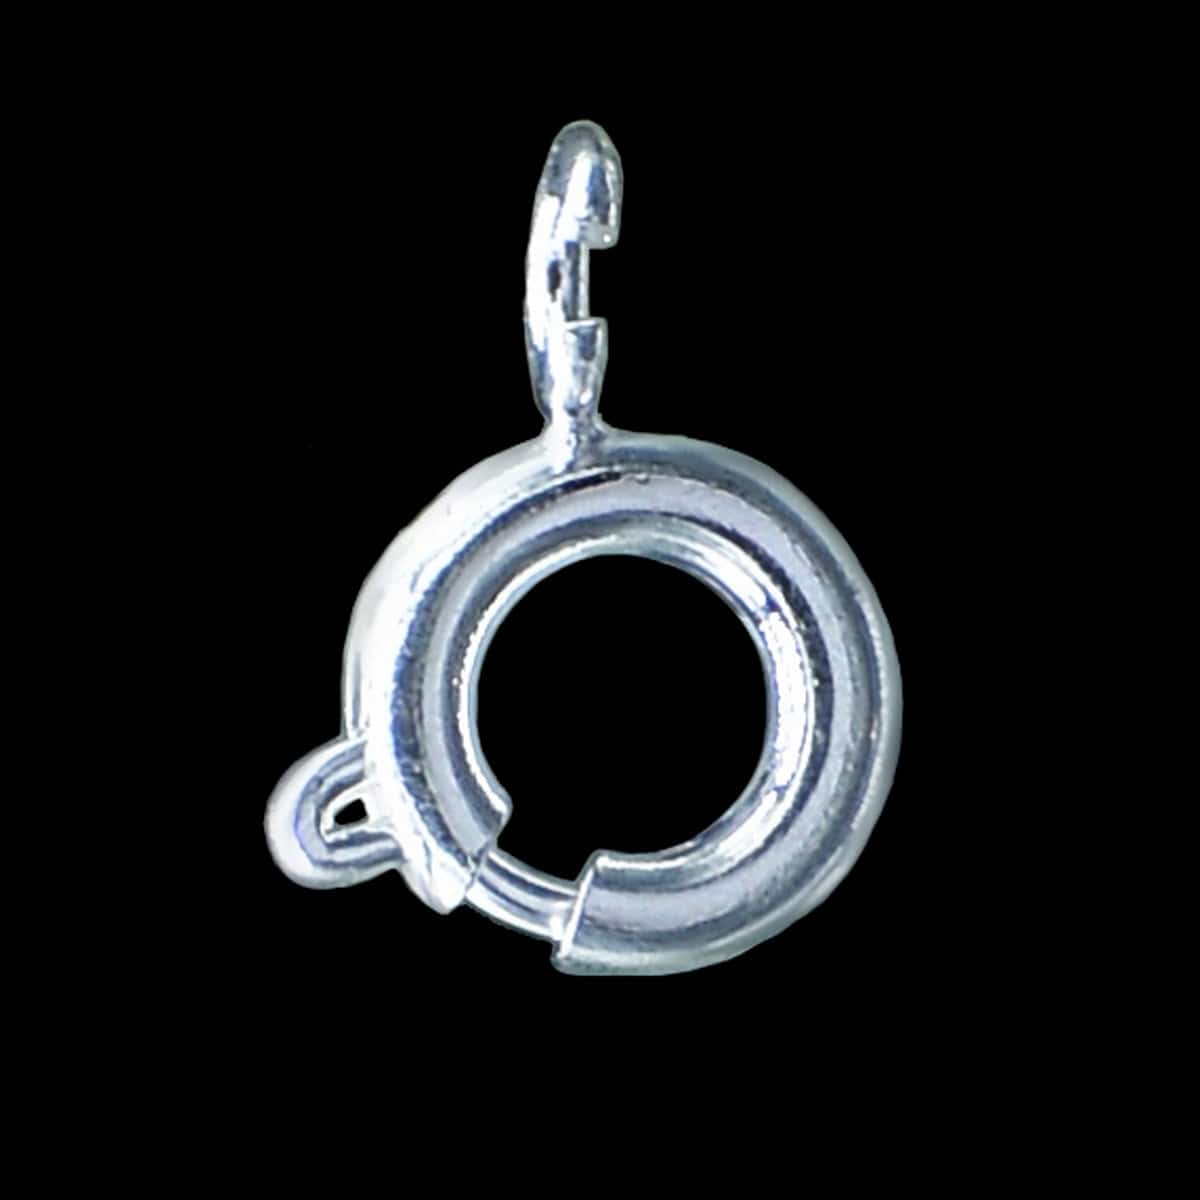 jags-mumbai Resin Accessories And More Jewellery Springring Hooks Small Silver Set Of 10 Pcs JSHS02